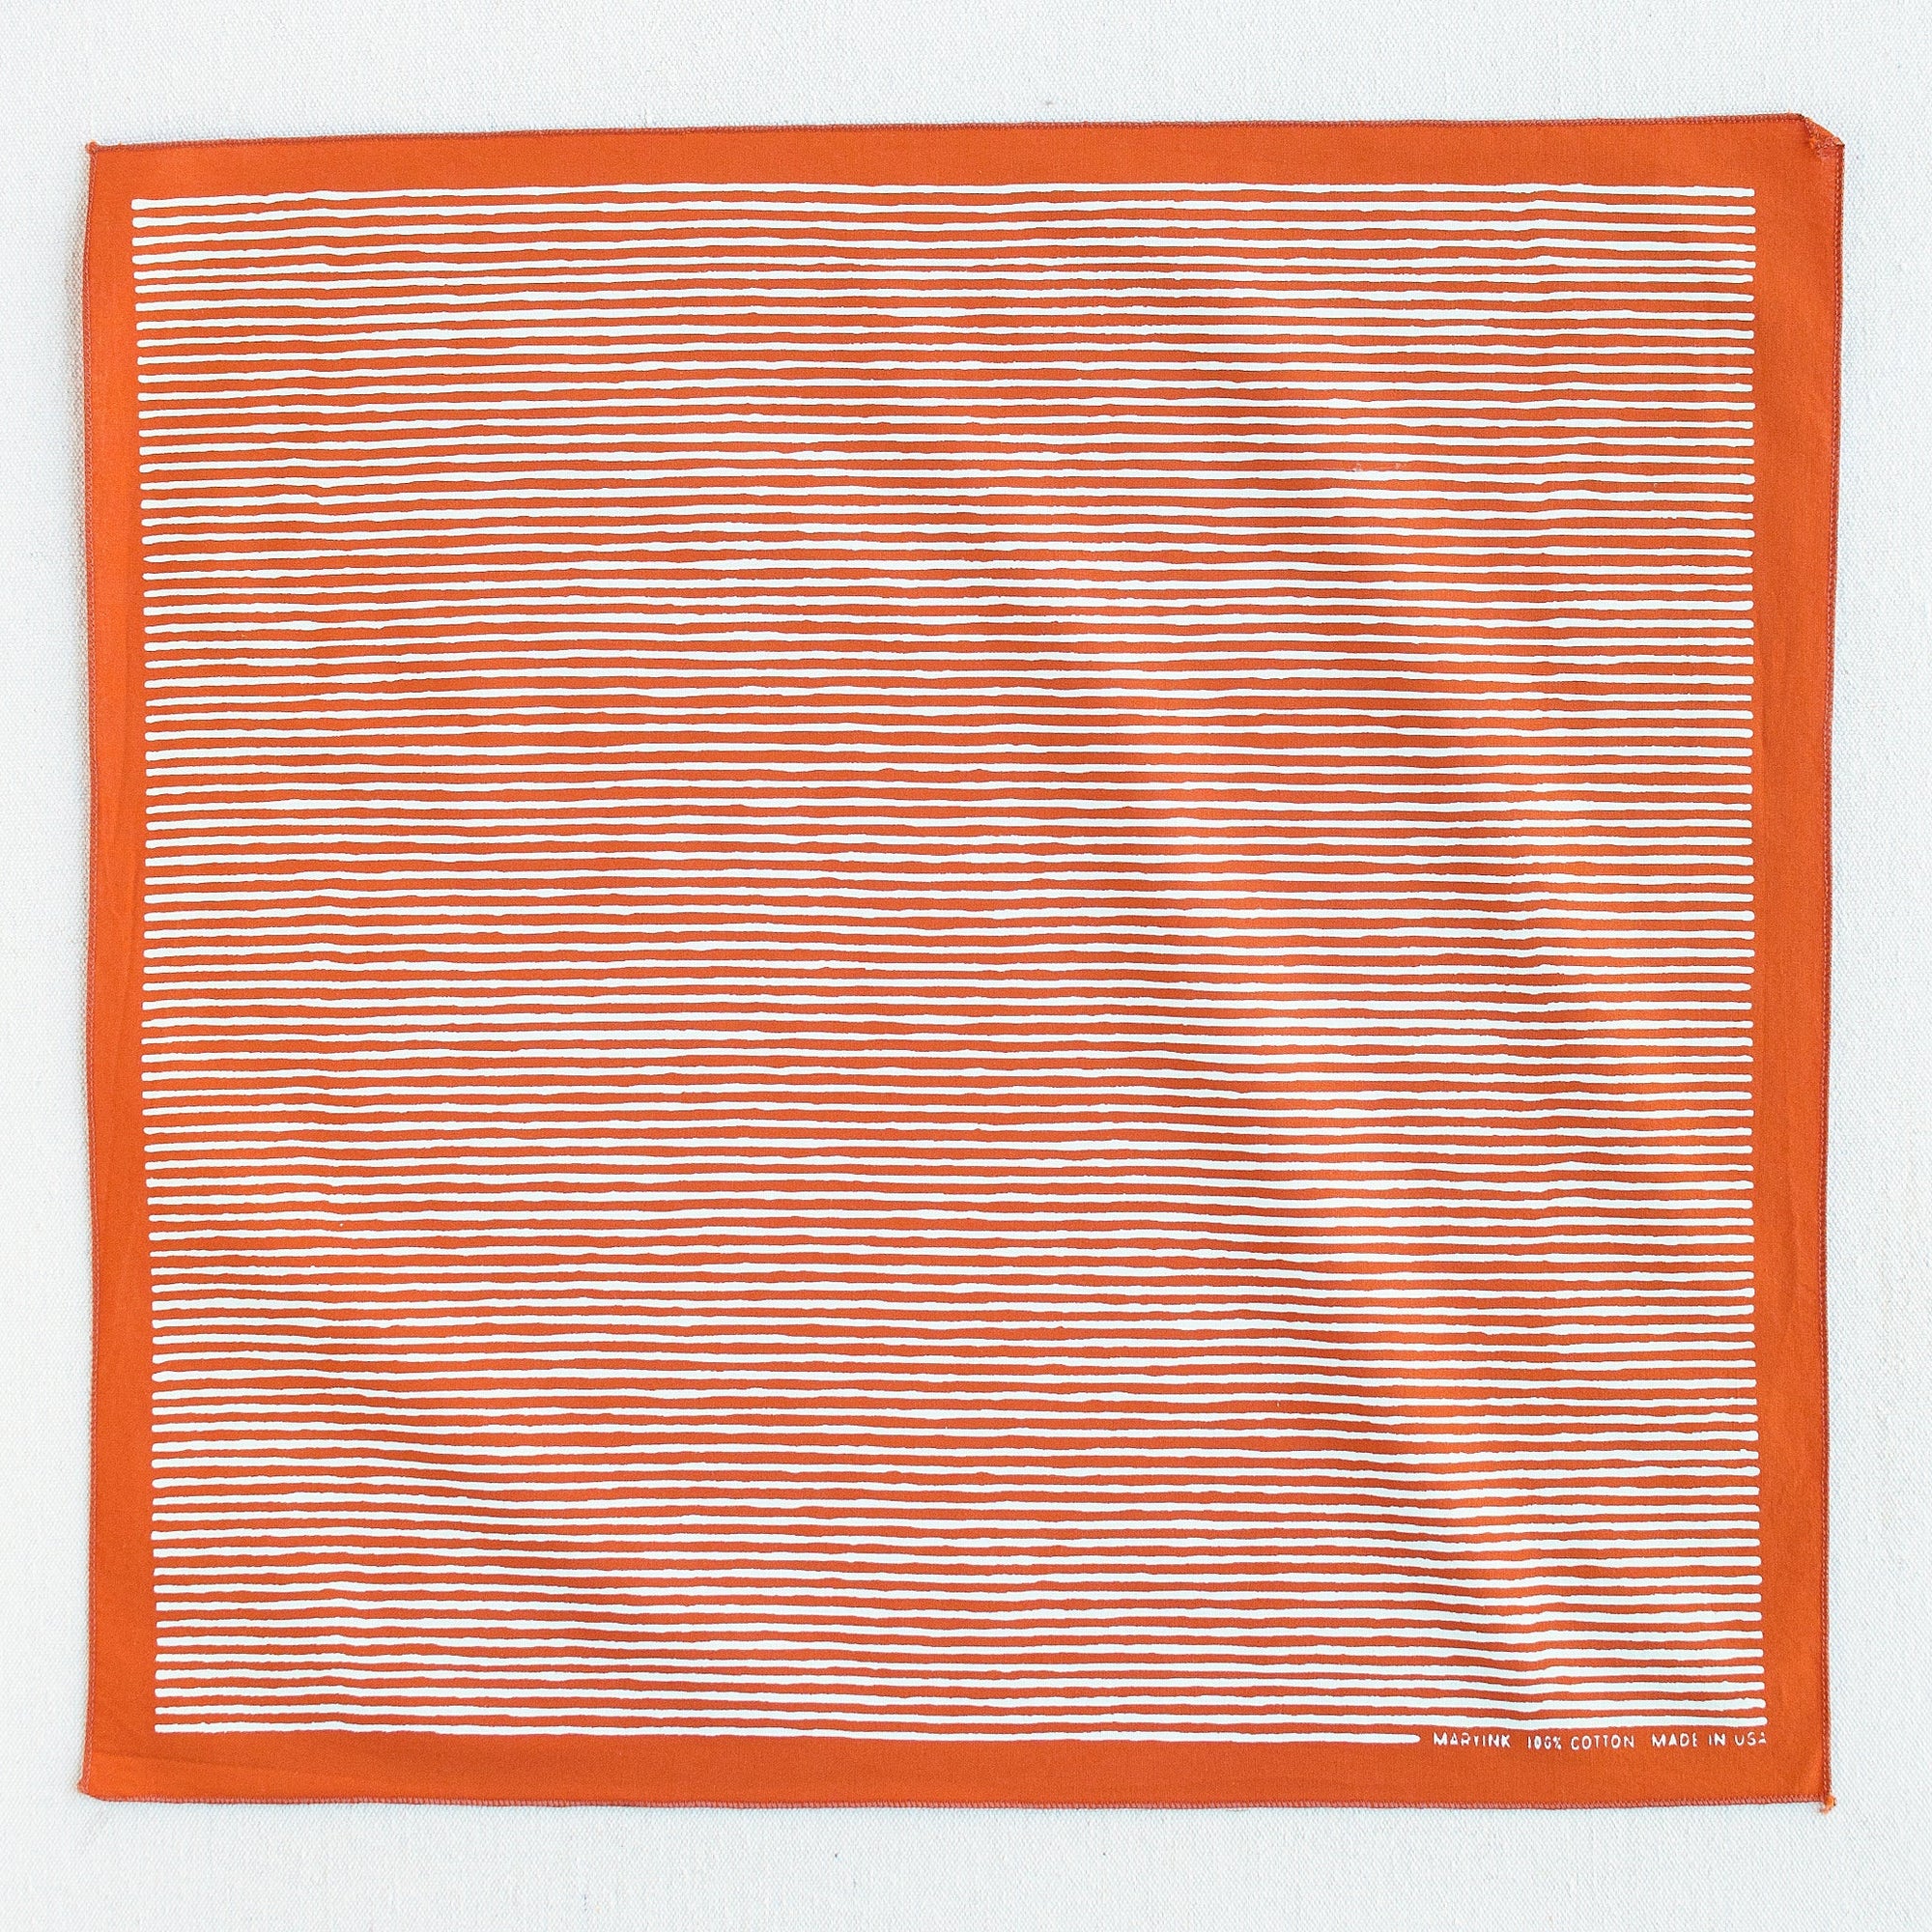 Burnt orange bandana with white striped screen print, shown open so the whole print is visible.